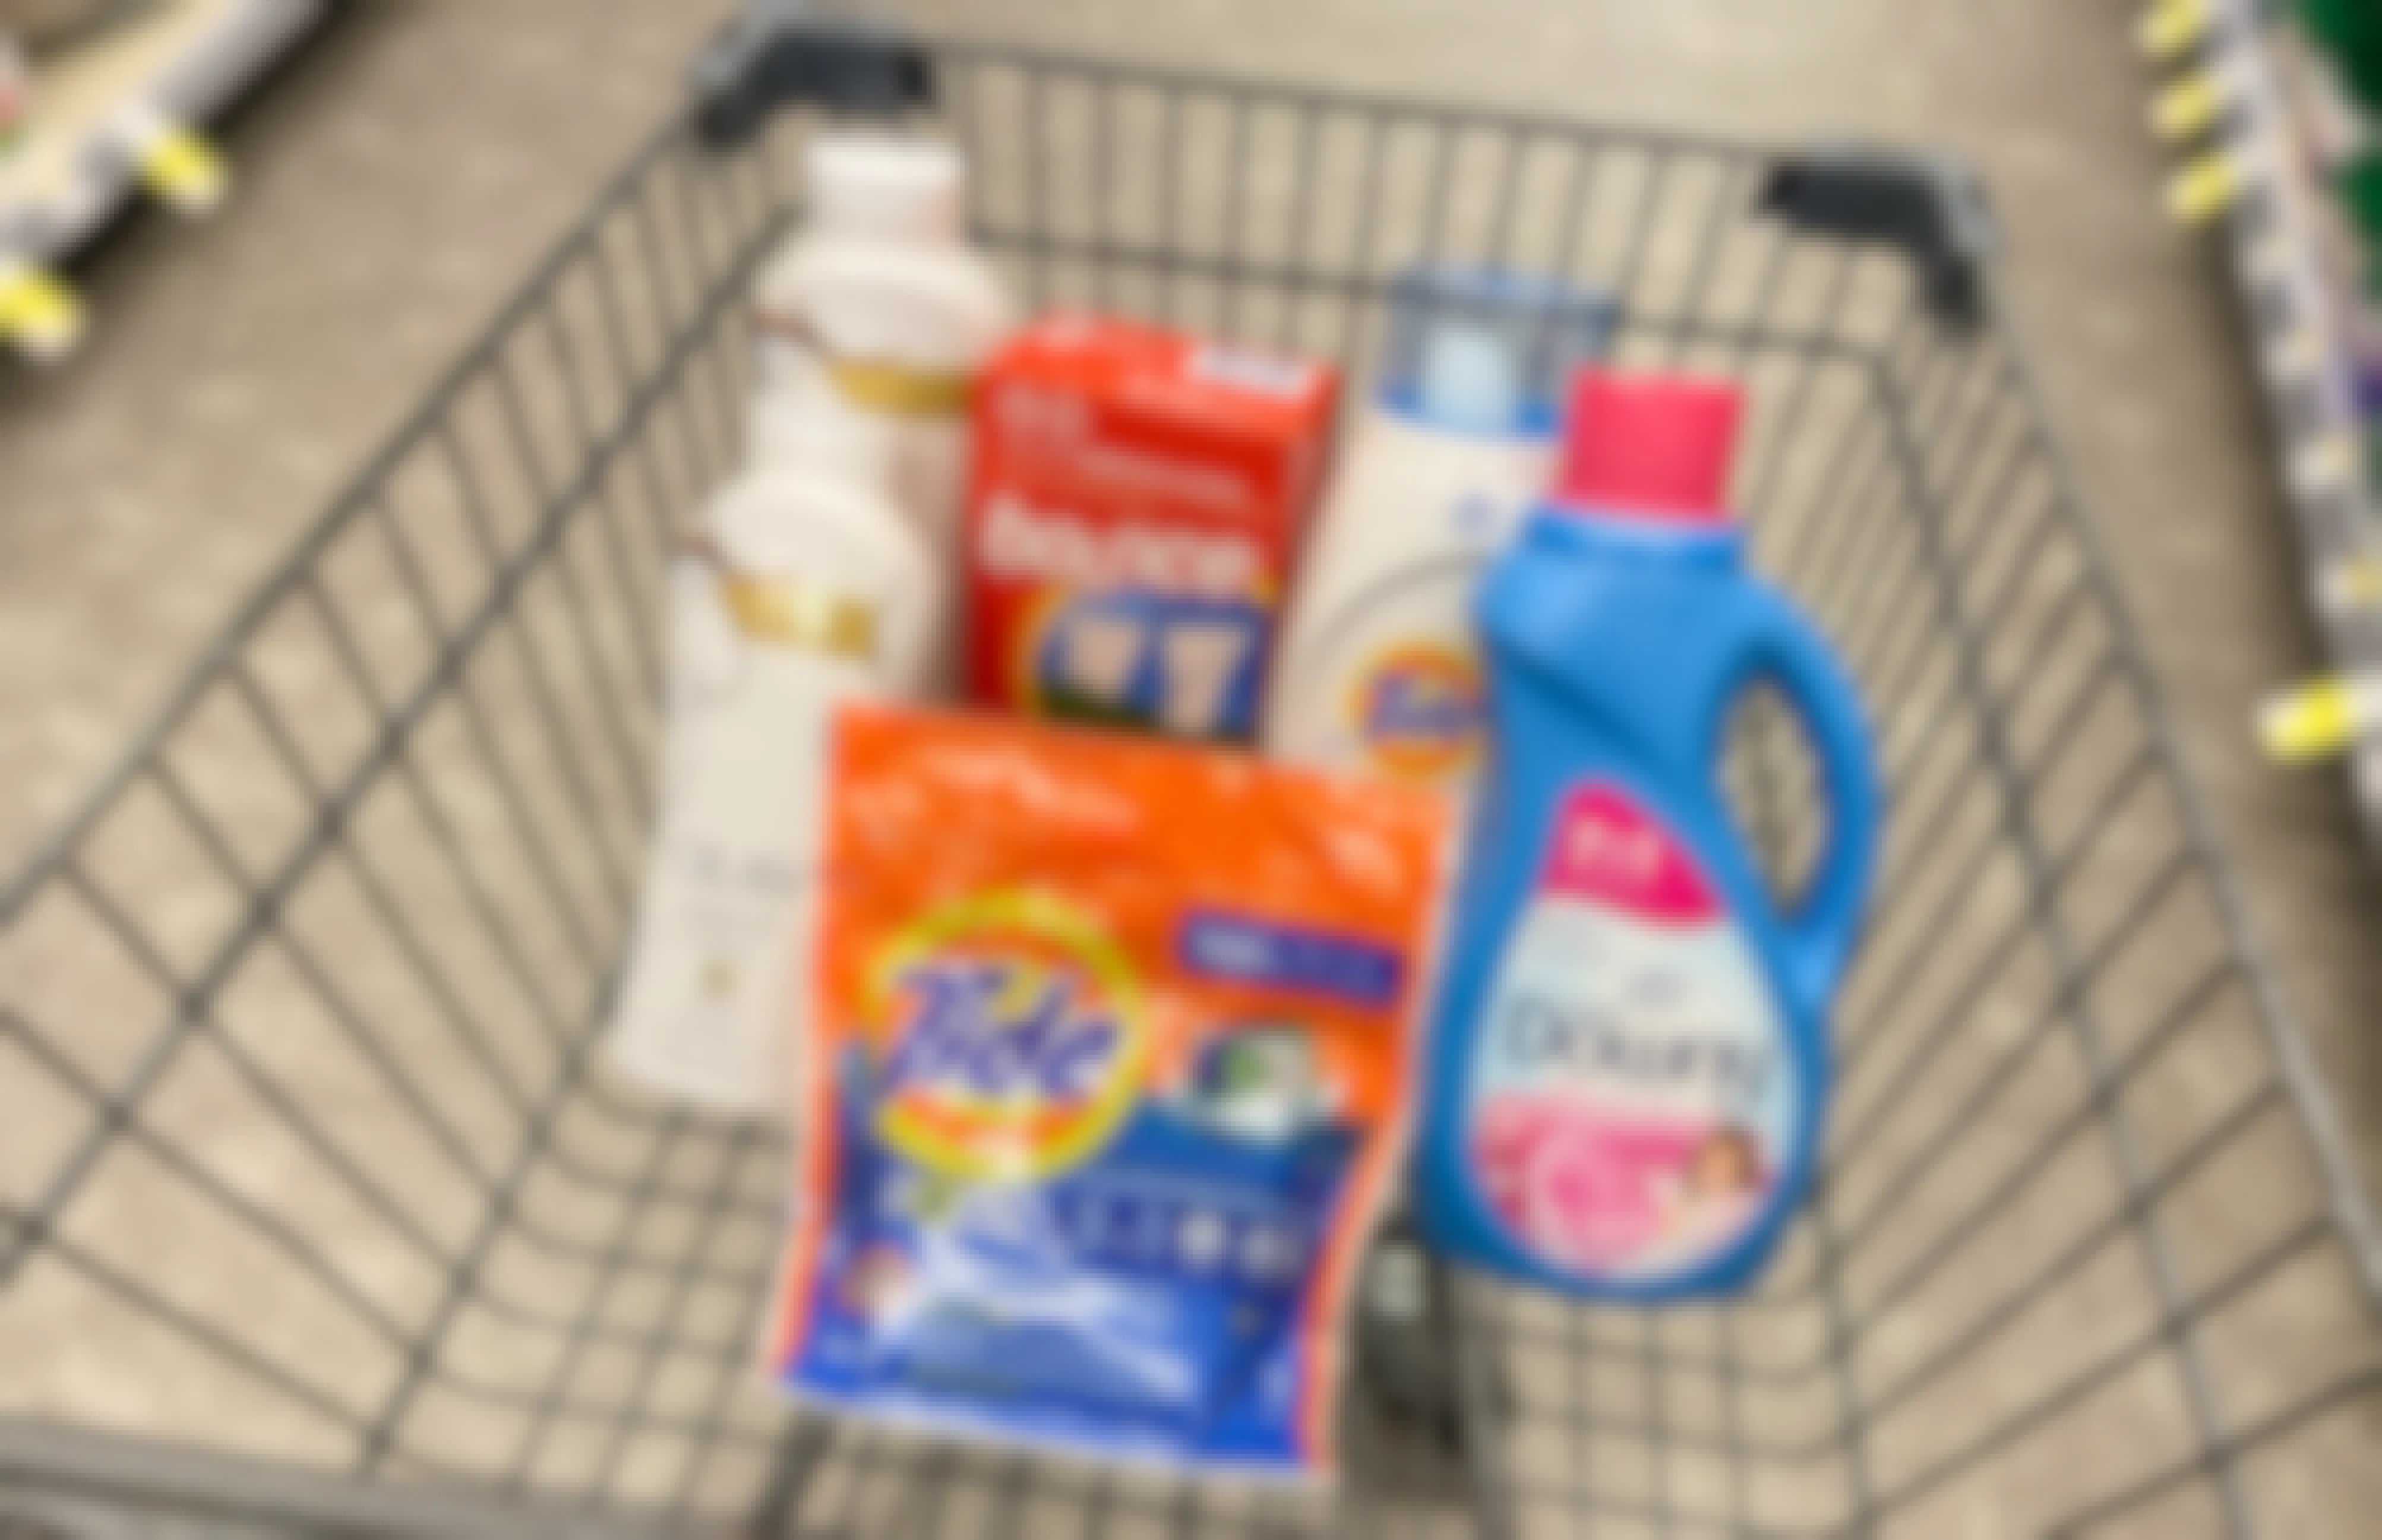 walgreens cart with tide, olay, bounce, and downy